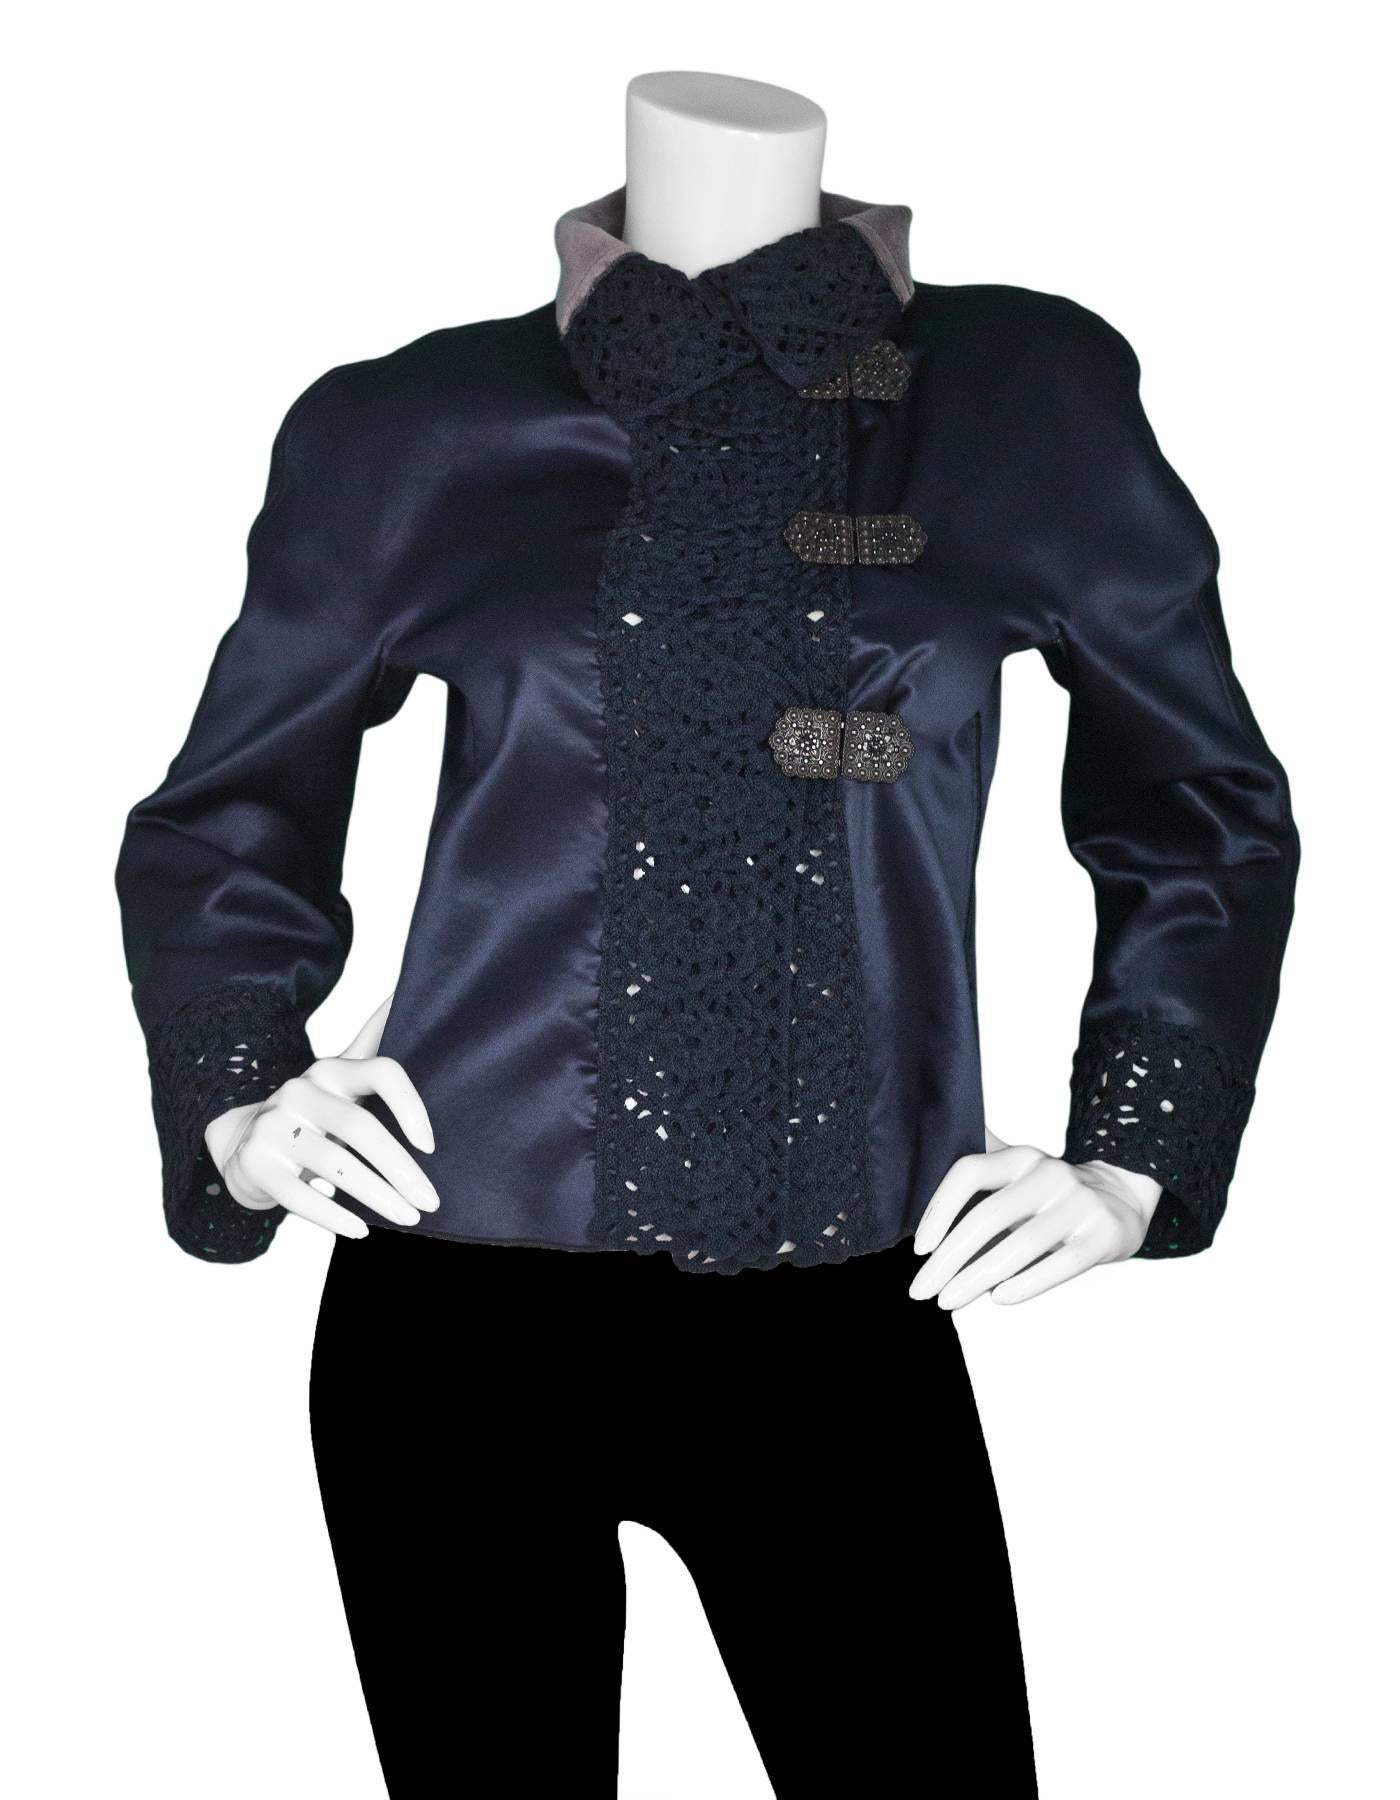 Giorgio Armani Navy Satin & Crochet Trim Jacket Sz IT40
Features crocheted trim and jeweled buttons

Made In: Italy
Color: Navy
Composition: Not listed, believed to be silk-blend
Lining: Grey textile
Closure/Opening: Front hook and eye button